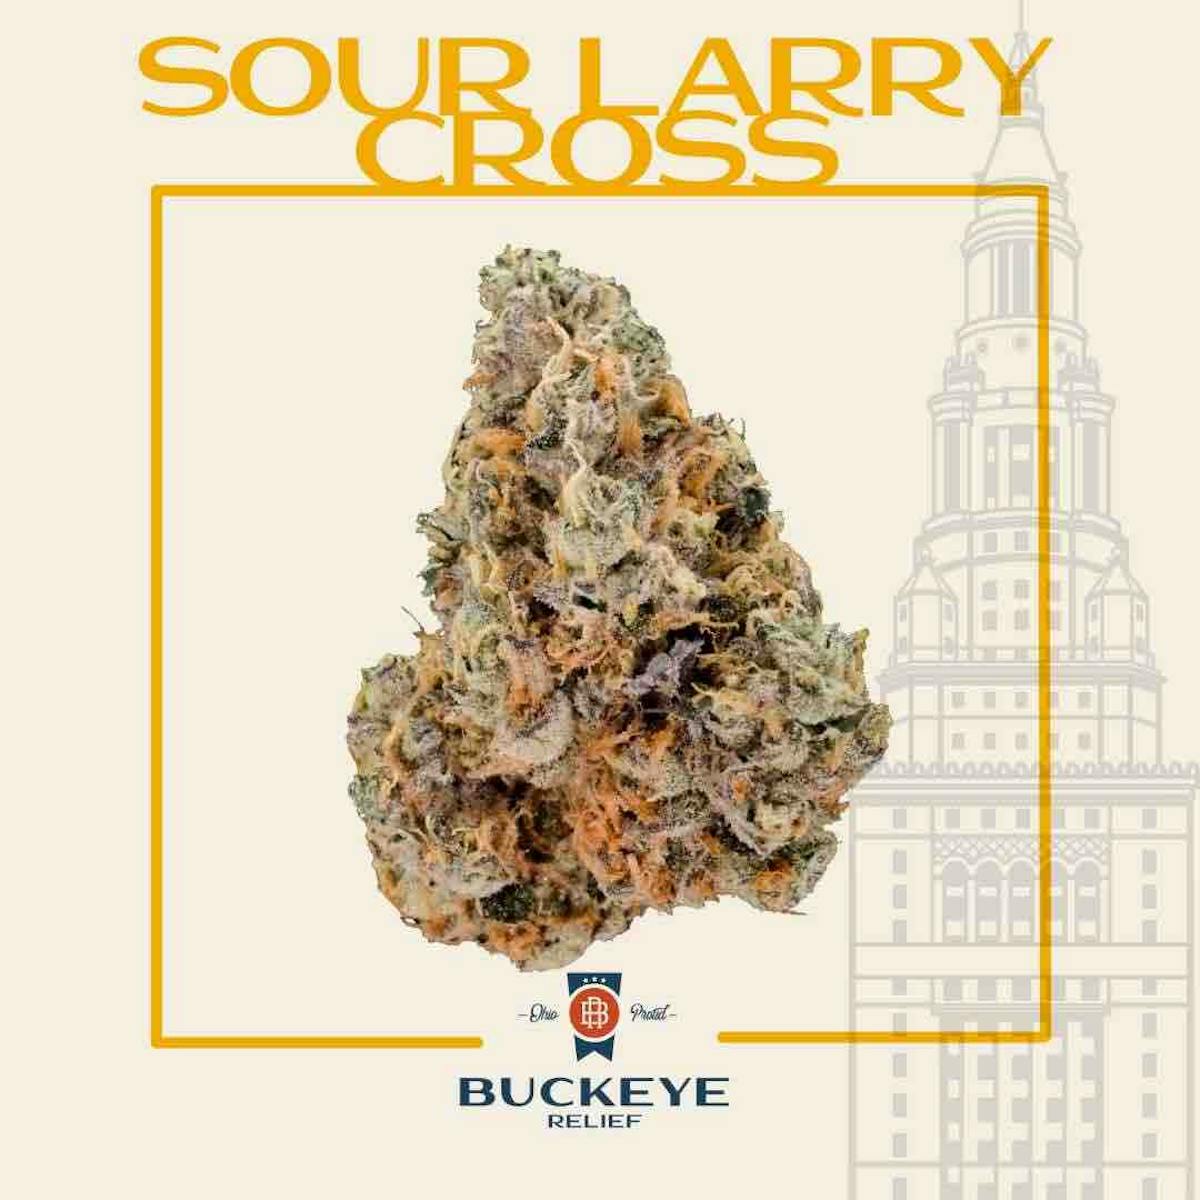 image of Sour Larry Cross